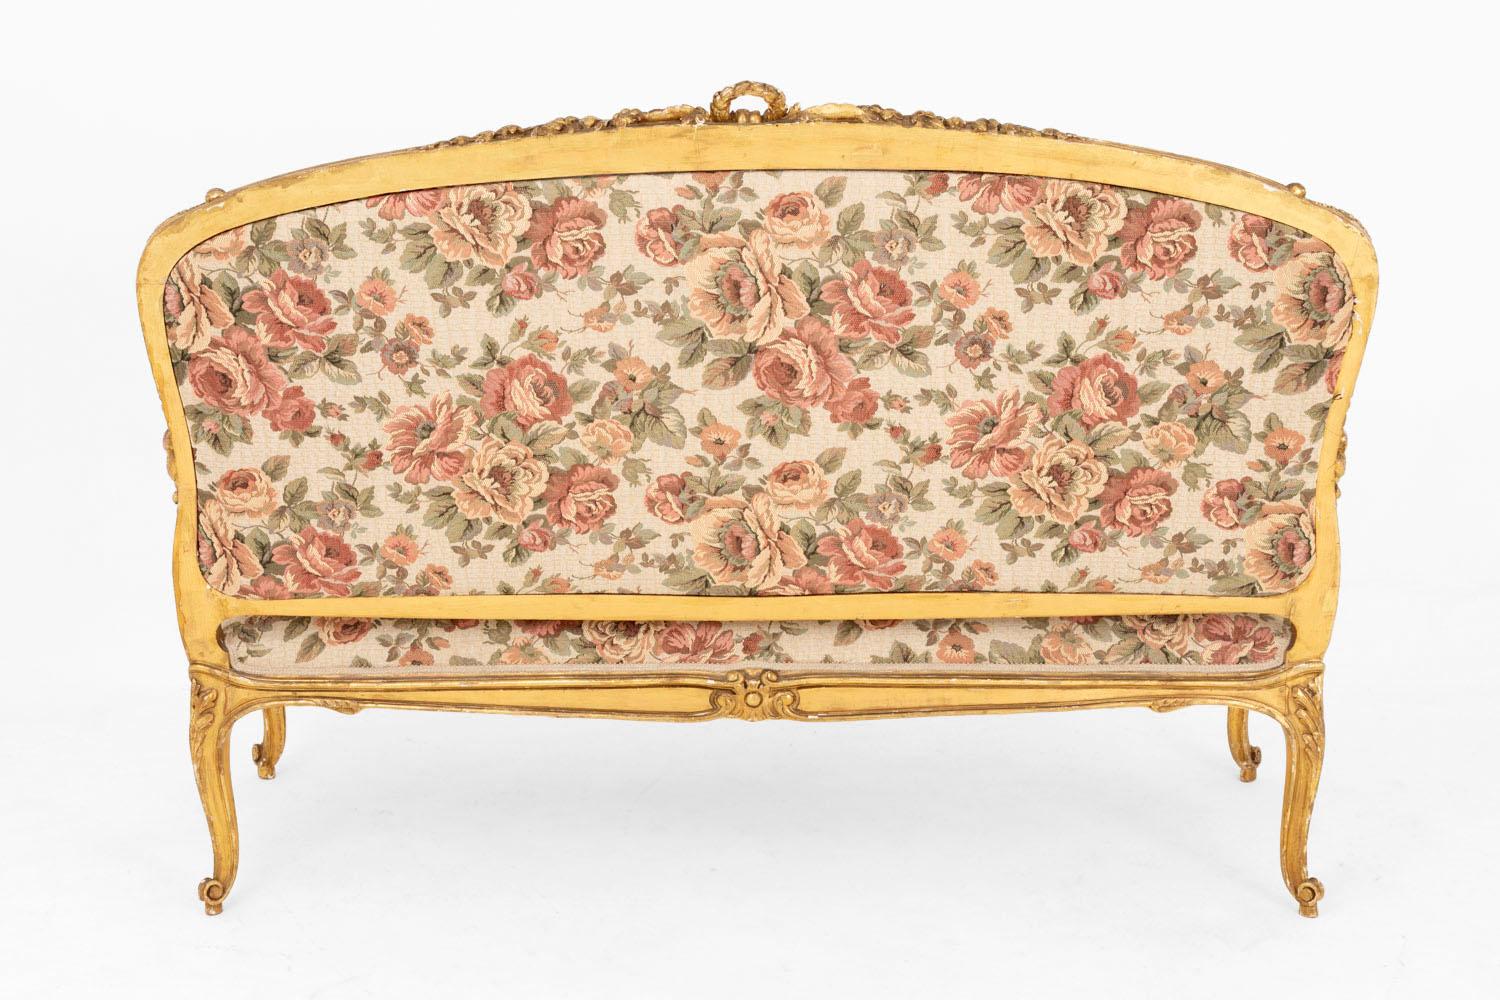 Louis XV style sofa in giltwood standing on four cabriole legs finished by scrolls and decorated with acanthus leaves. Scalloped apron with a decor of swags with flowers.
Arm supports slightly behind the leg line and adorned with acanthus leaves.